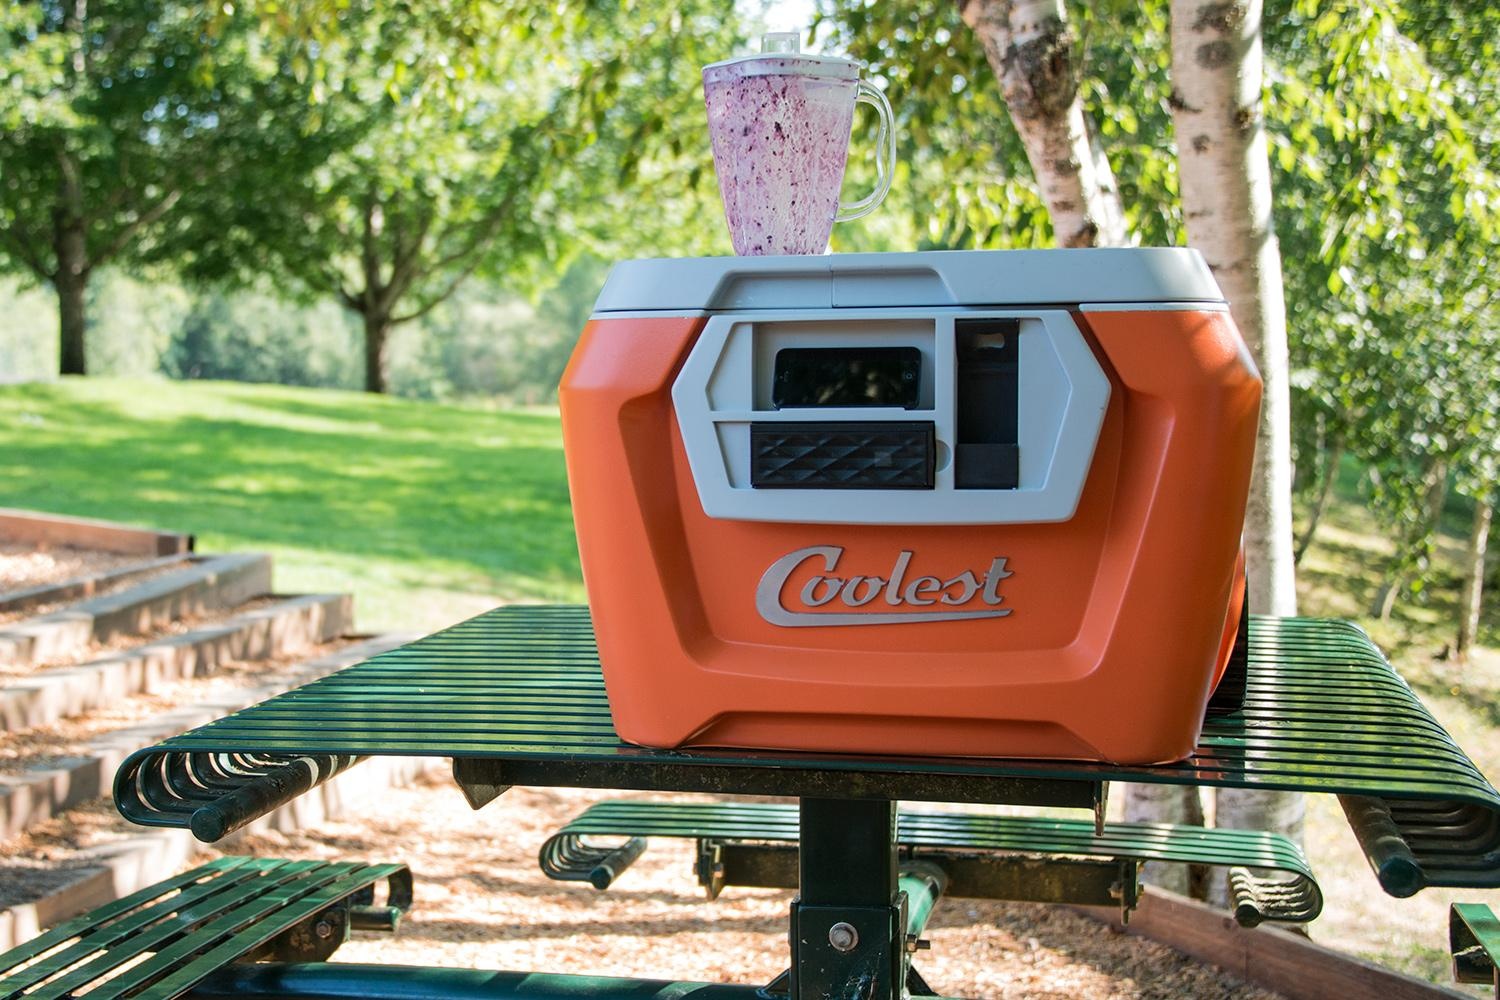 Coolest Cooler turns warm: More crowdfunding disappointment